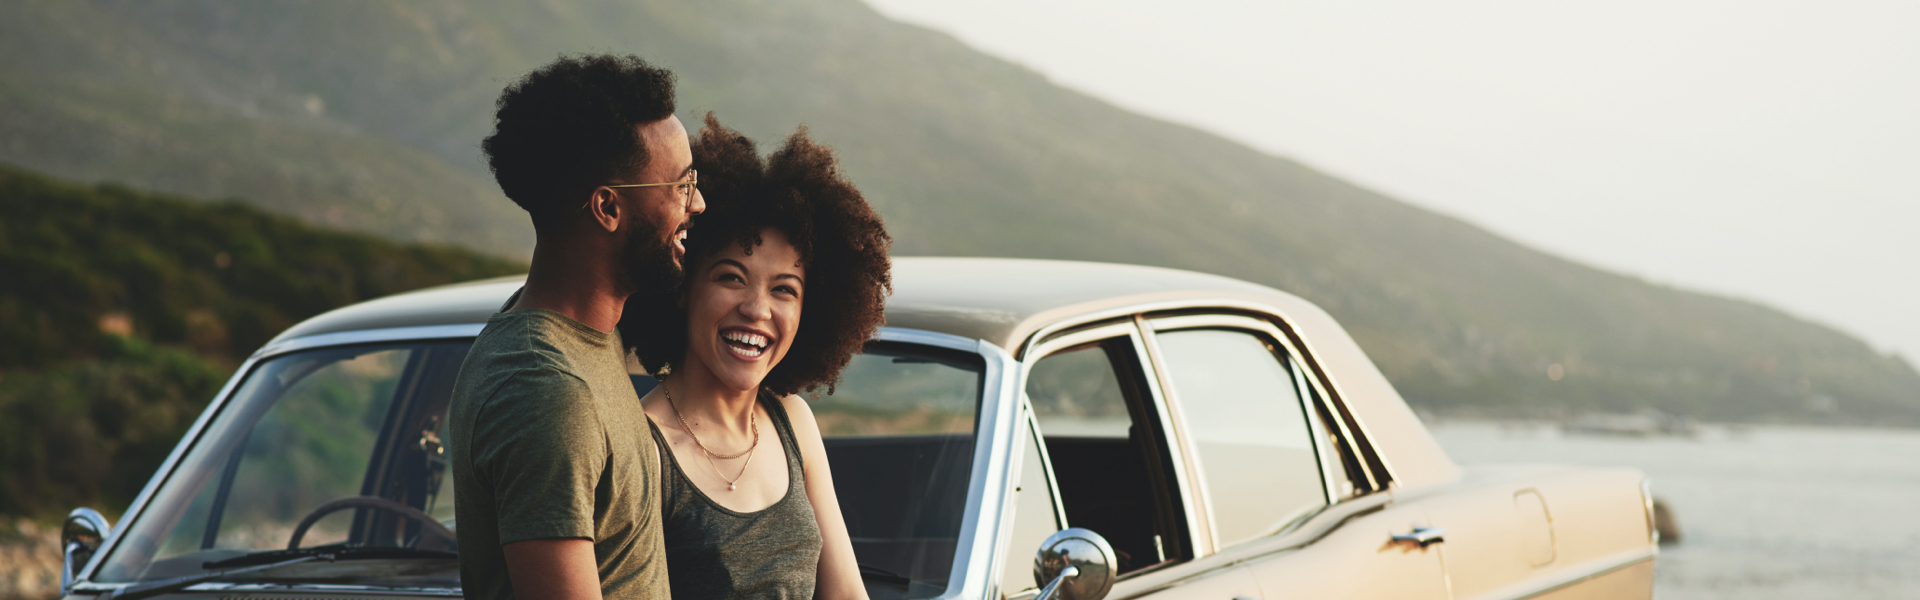 A young couple is smiling while resting against the hood of a car.